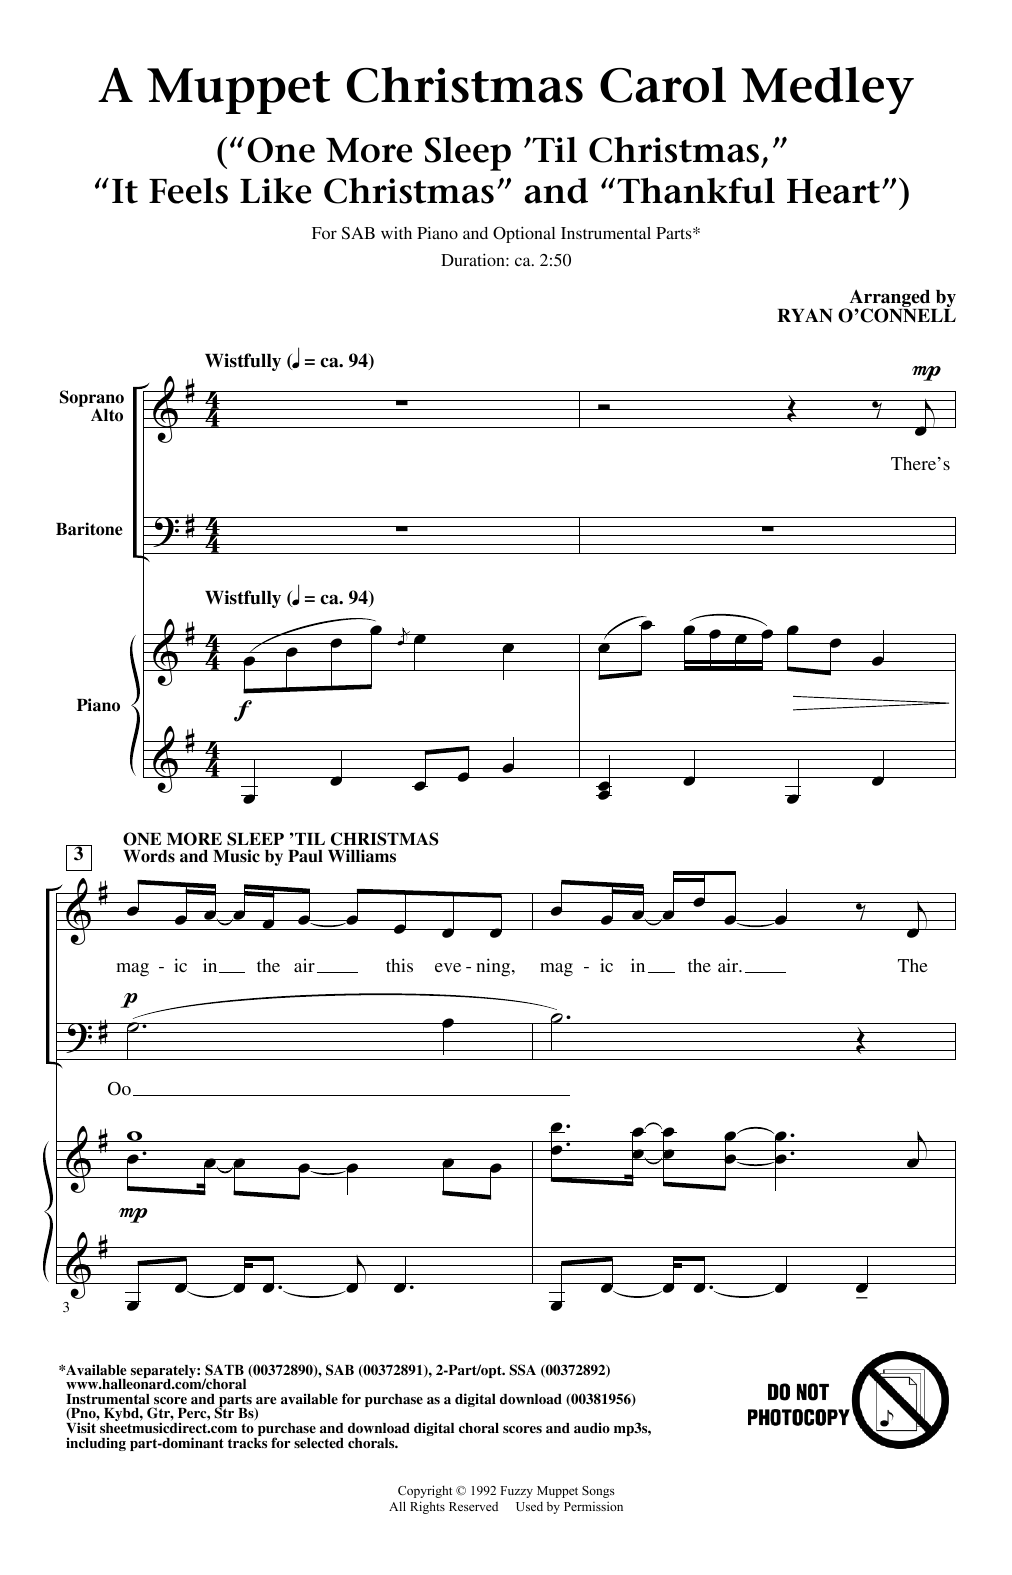 Download Ryan O'Connell Muppet Christmas Carol Medley (from The Sheet Music